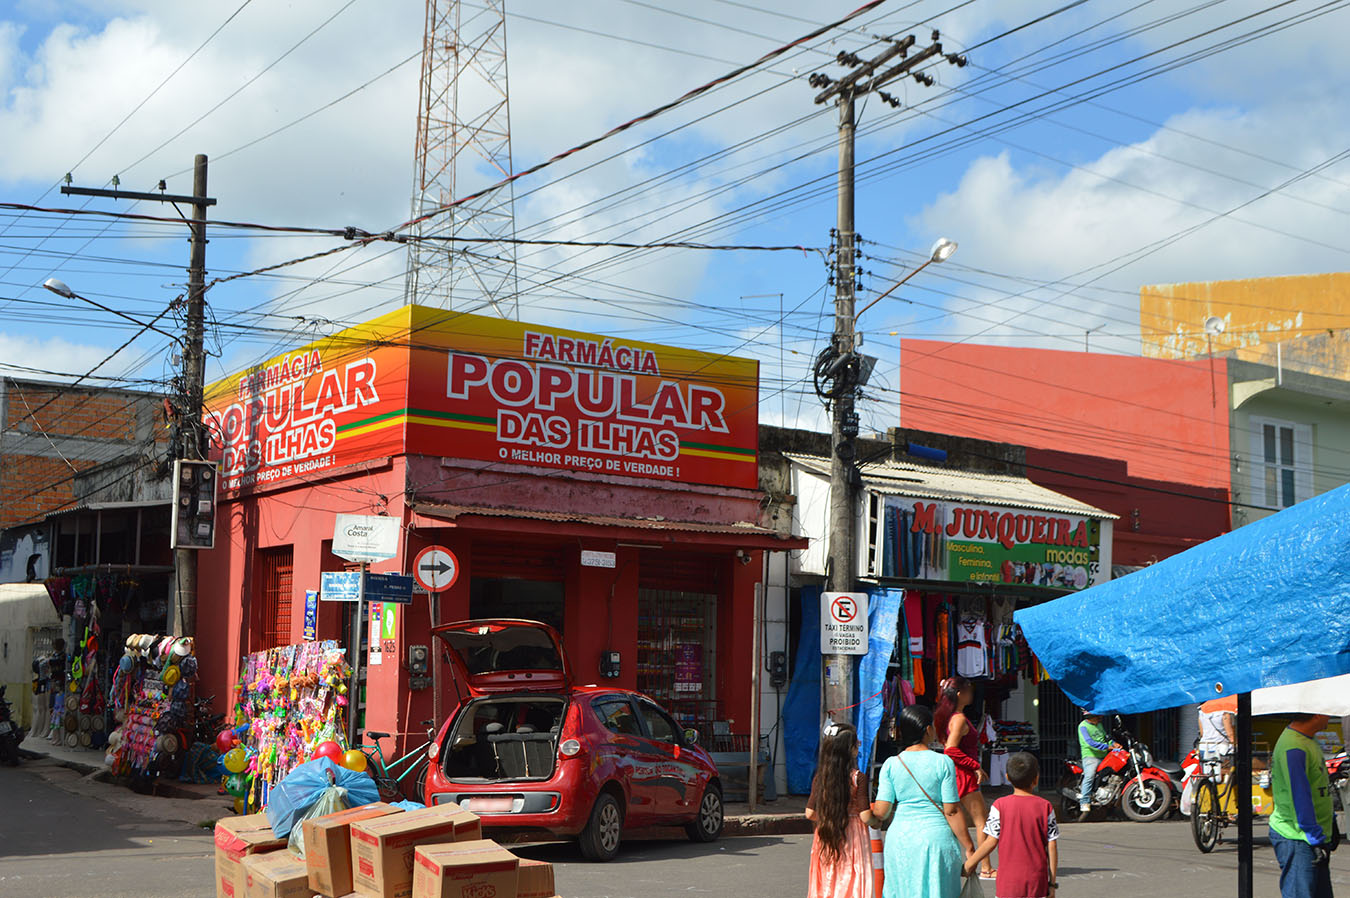 The “Popular Pharmacy of the Islands,” one of Abaetetuba’s many private pharmacies which models its name after a famous SUS program. Photo by Matthew Abel, October 2019.